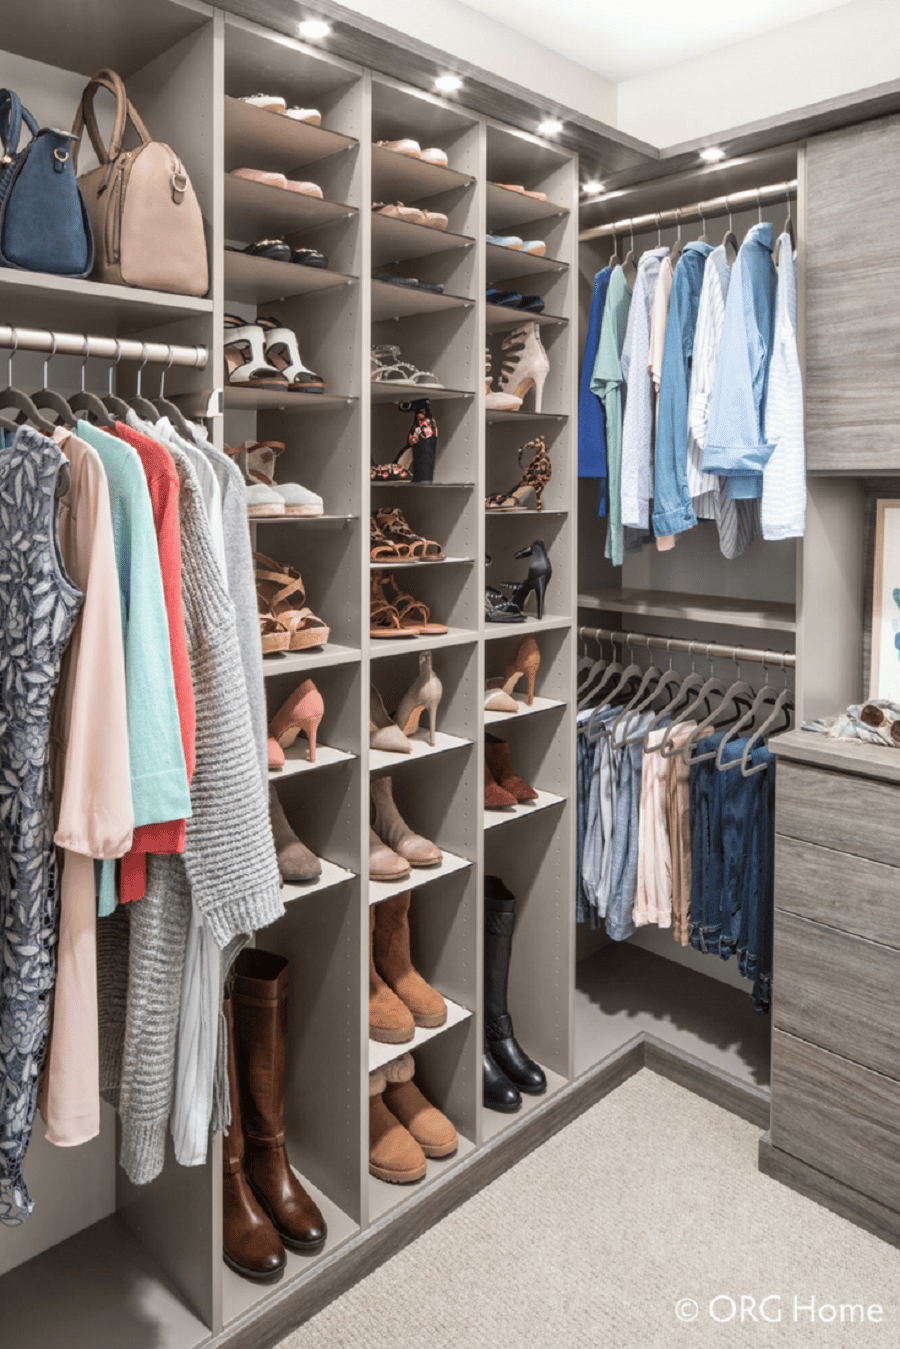 Problem 2 how to solve shoe storage problems in master closet | Westerville, OH | Innovate Home Org #MaximizeClosetSpace #Closet #ClosetStorage